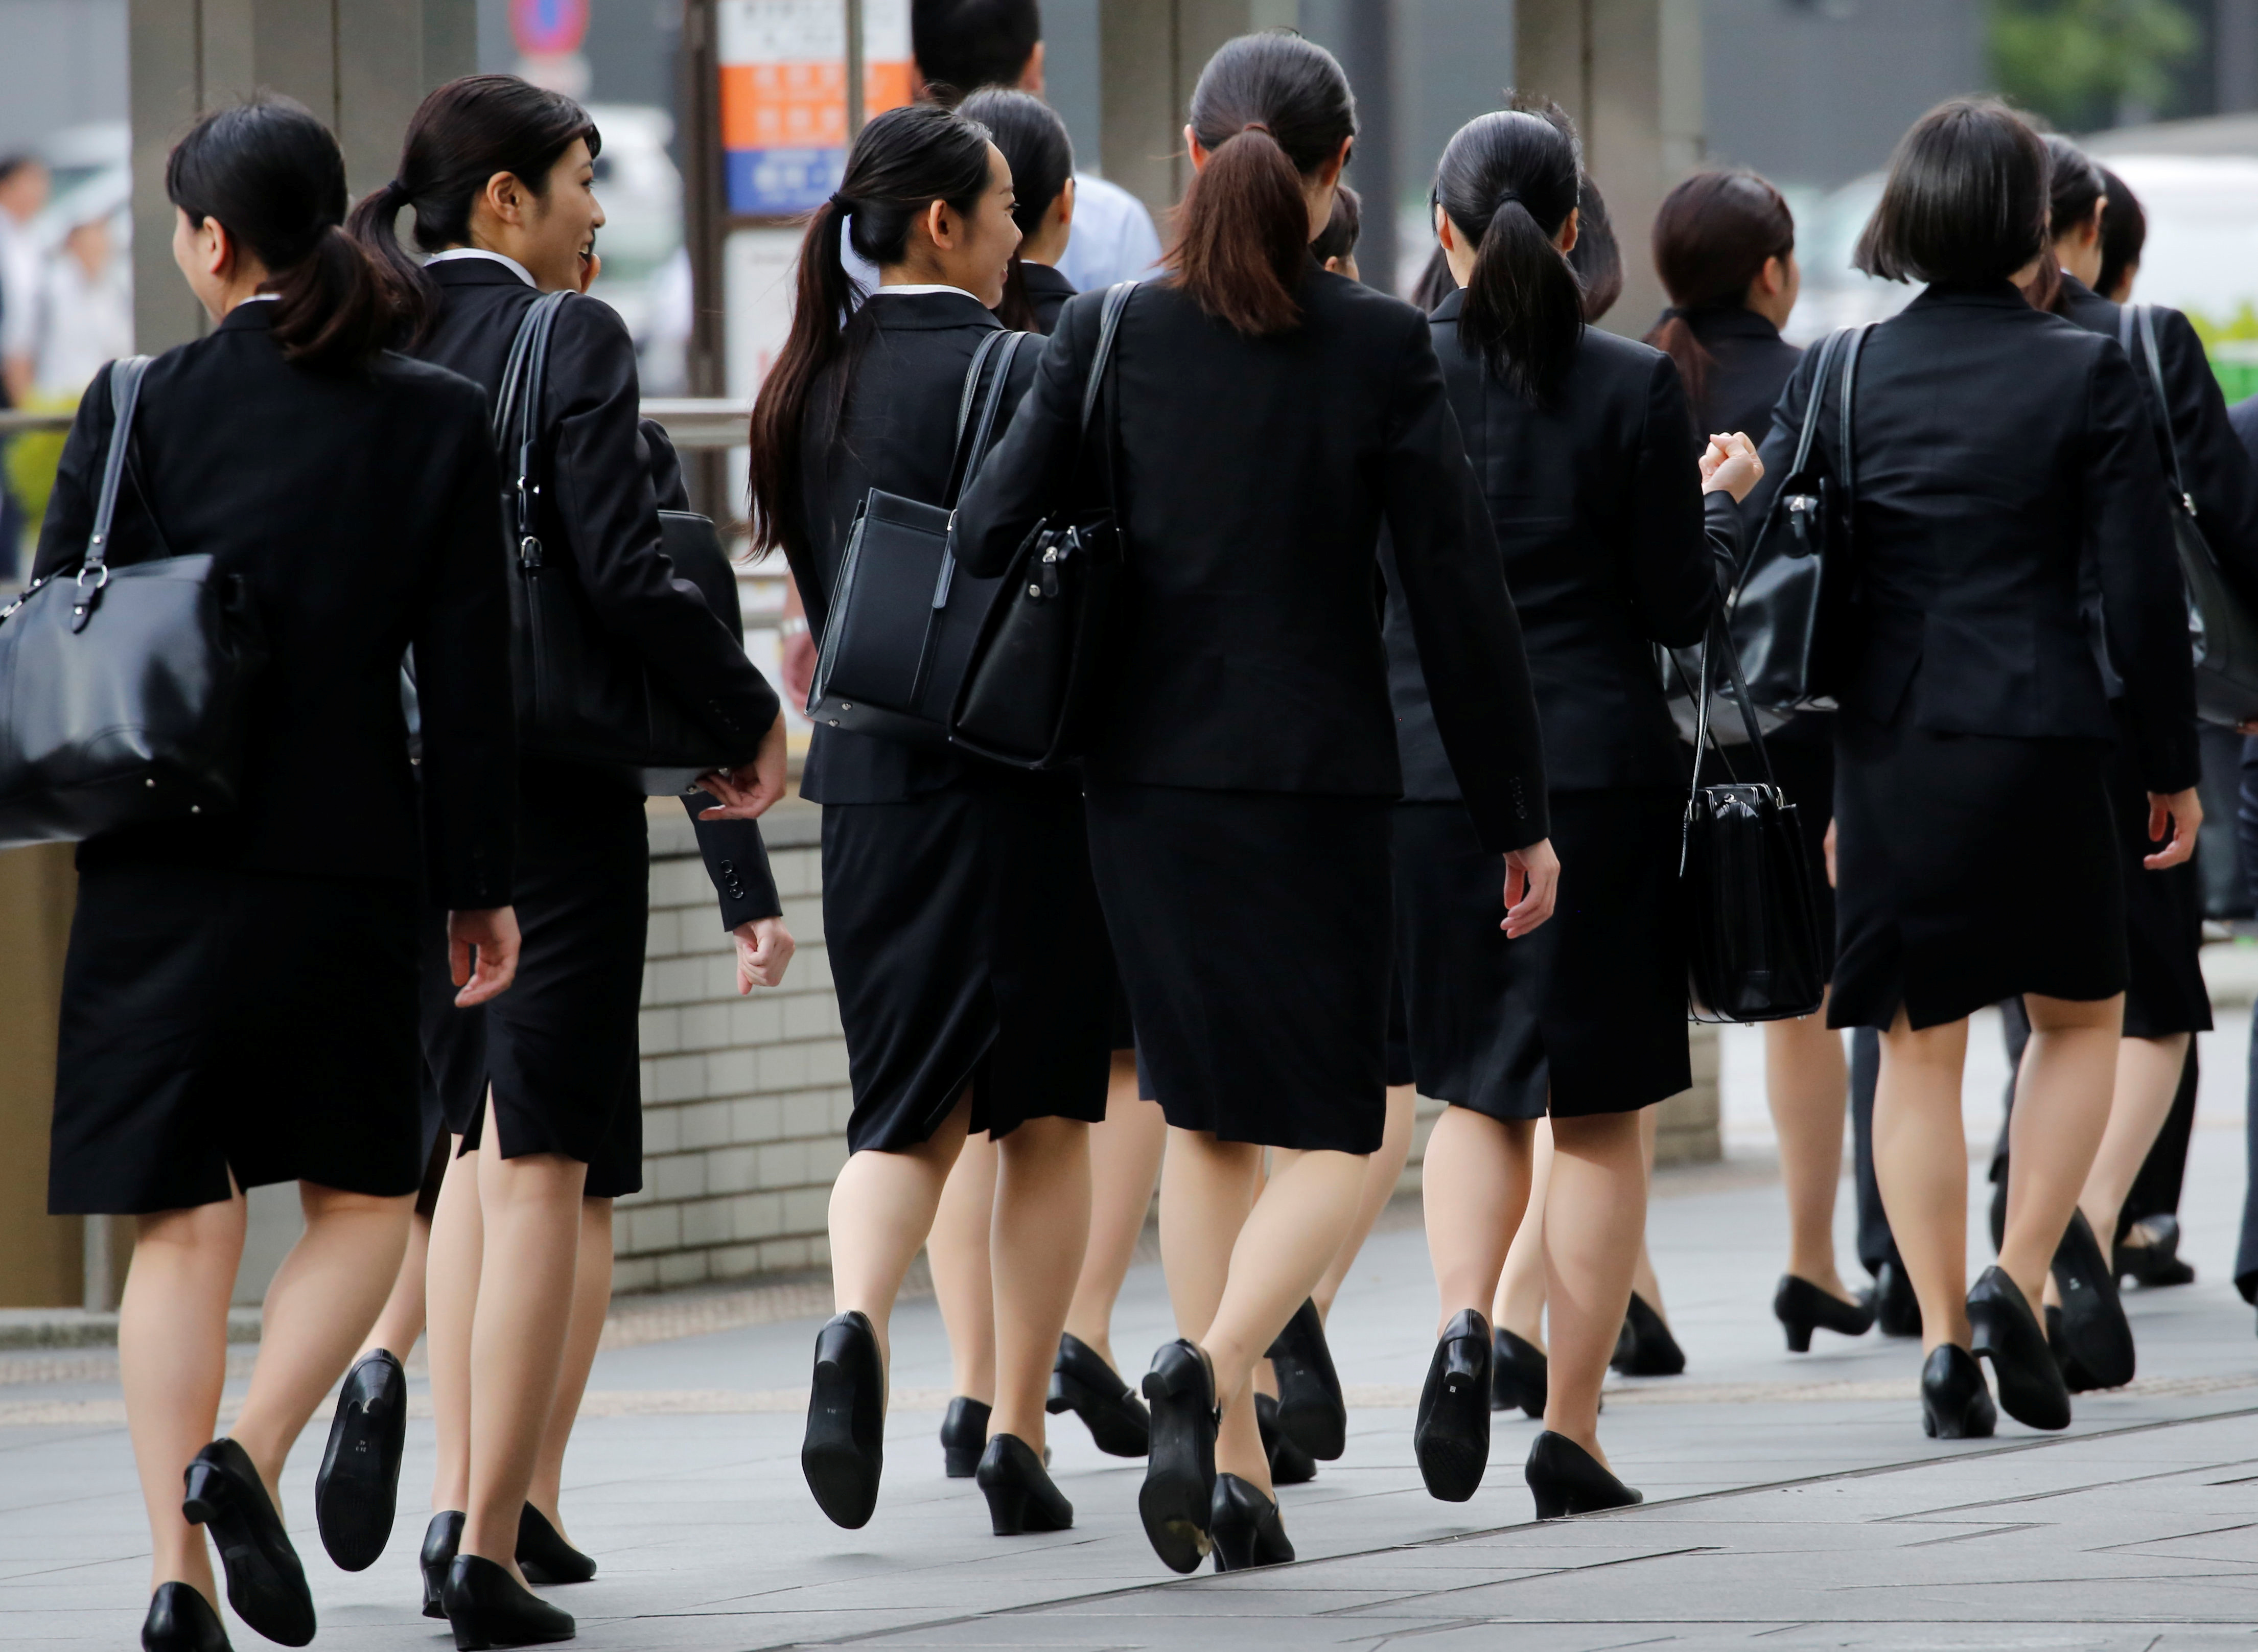 Female office workers wearing high heels, clothes and bags of the same colour make their way at a business district in Tokyo